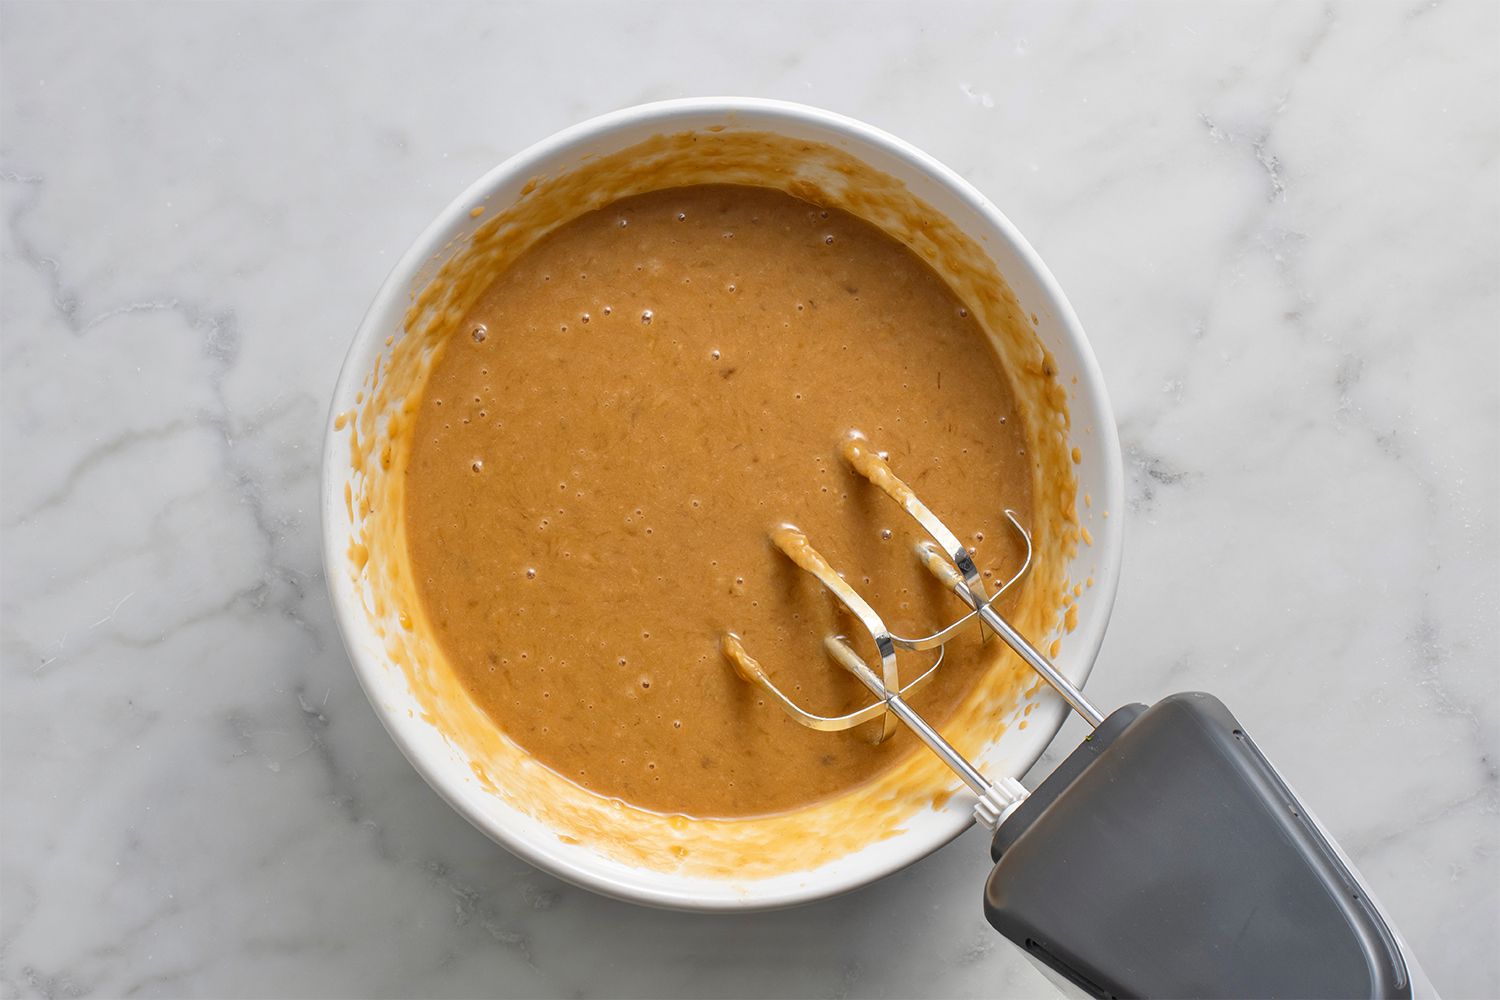 Peanut butter combined with the banana mixture in the bowl, using a hand mixer 